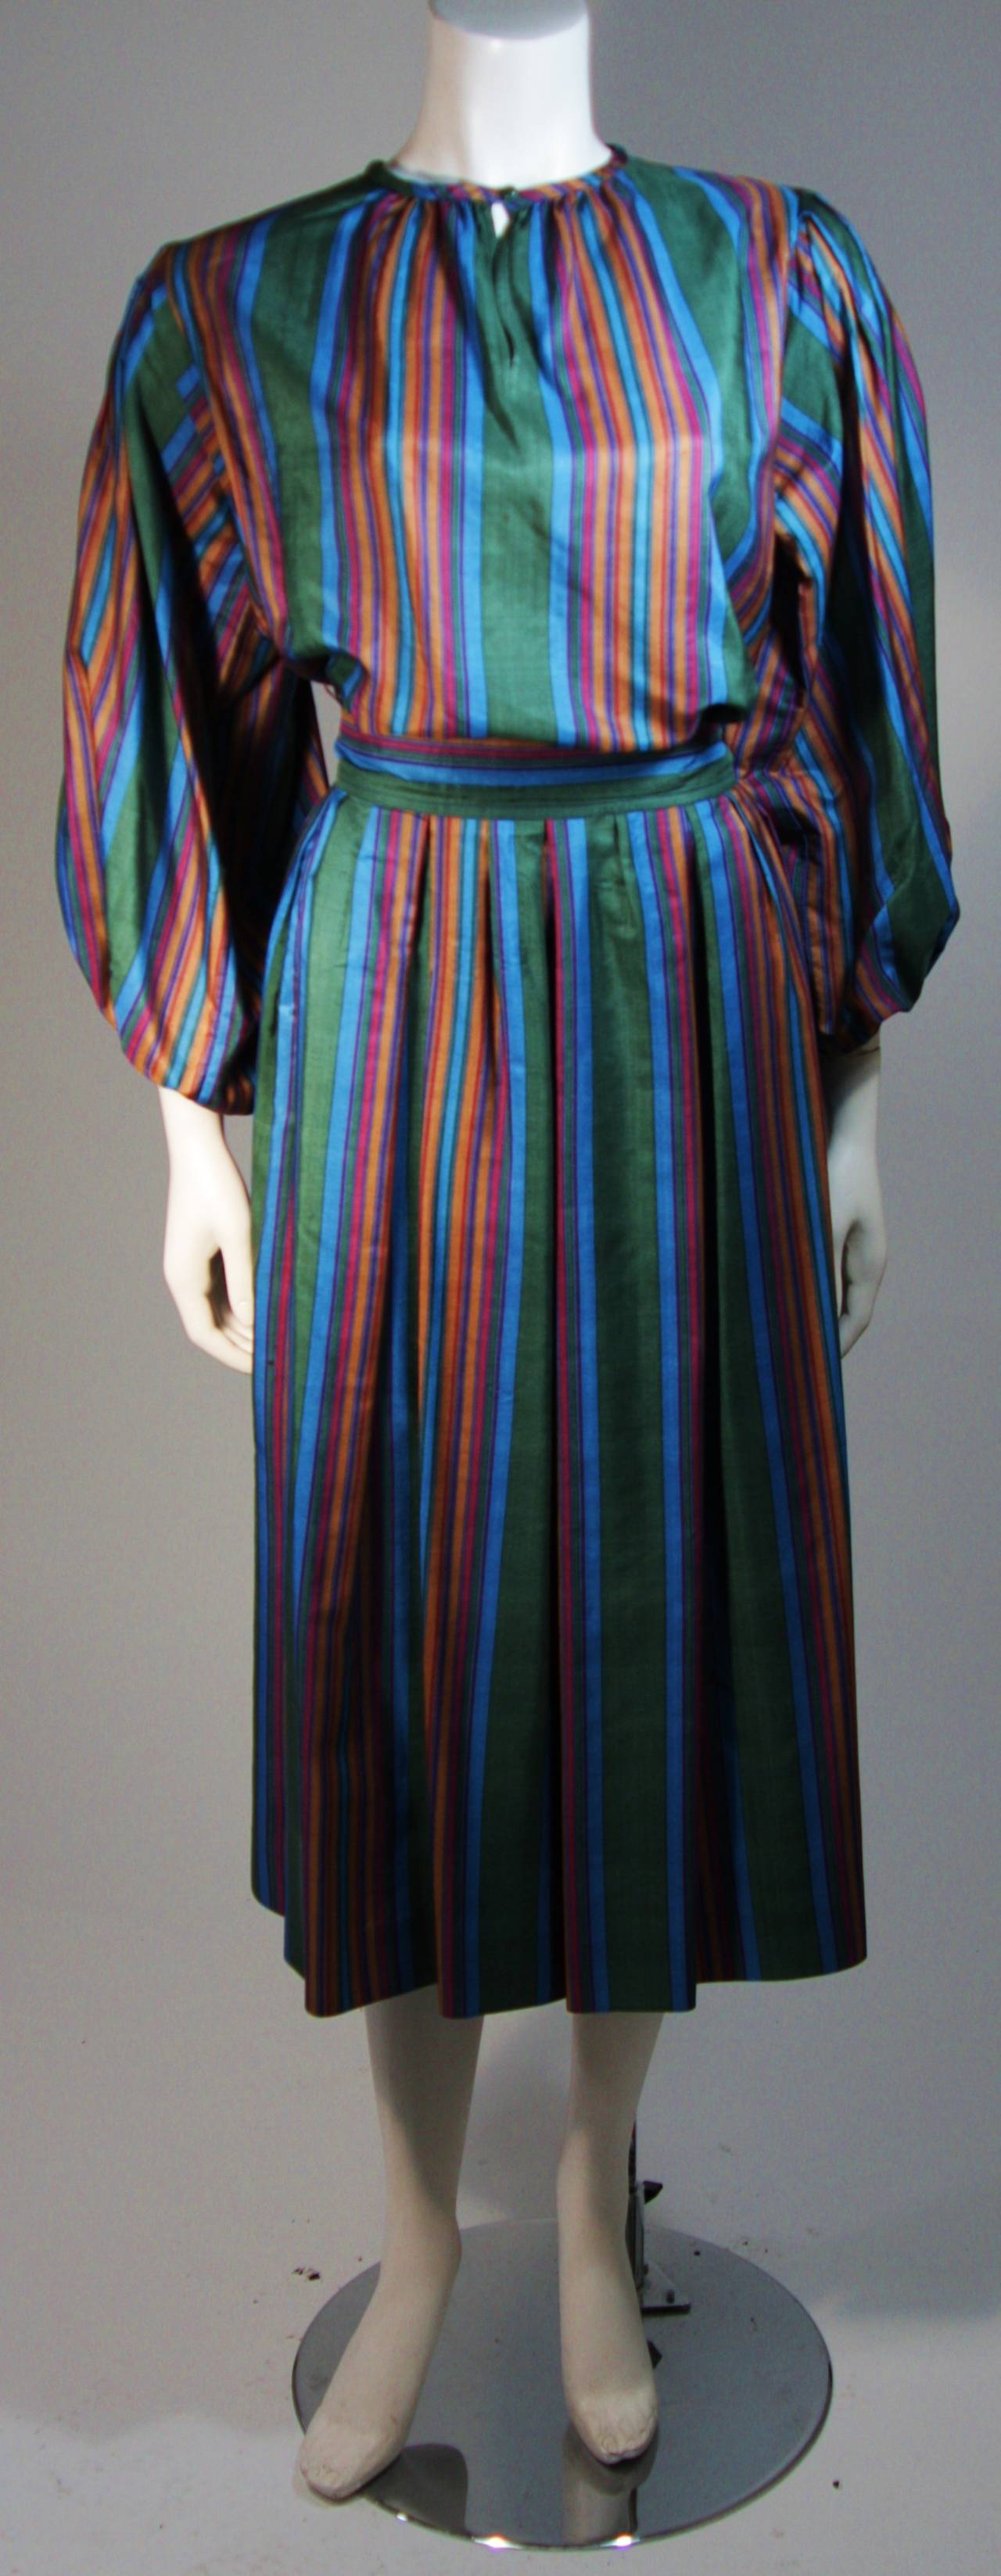 This Yves Saint Laurent set is composed of a silk with a textured finish in a vertical stripe pattern with a color story featuring blue, green, magenta and orange. The slightly oversize top features a keyhole opening with button. the skirt has a